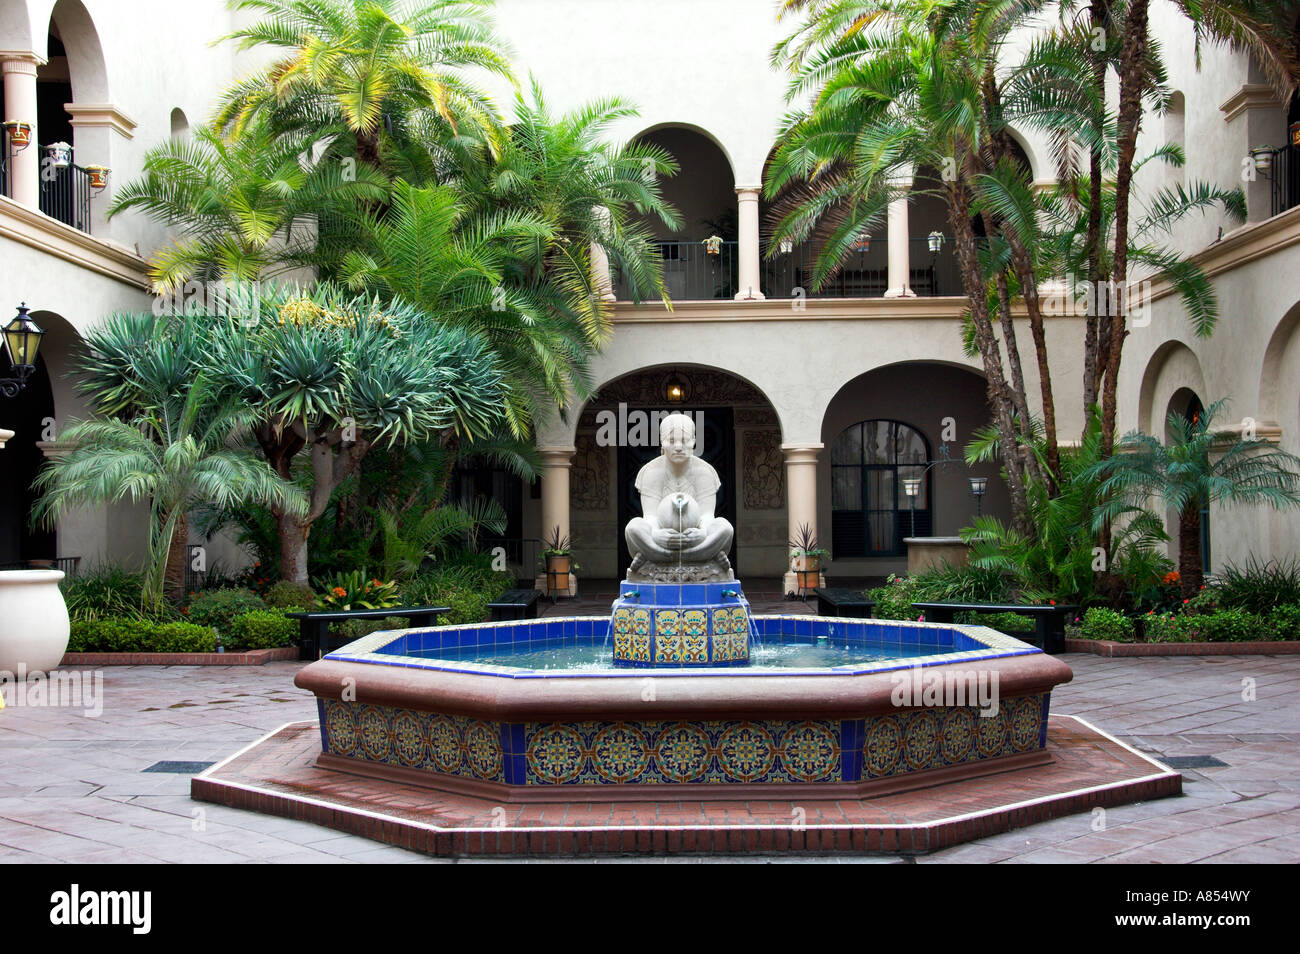 Interior courtyard with a decorative water fountain at the Stock Photo